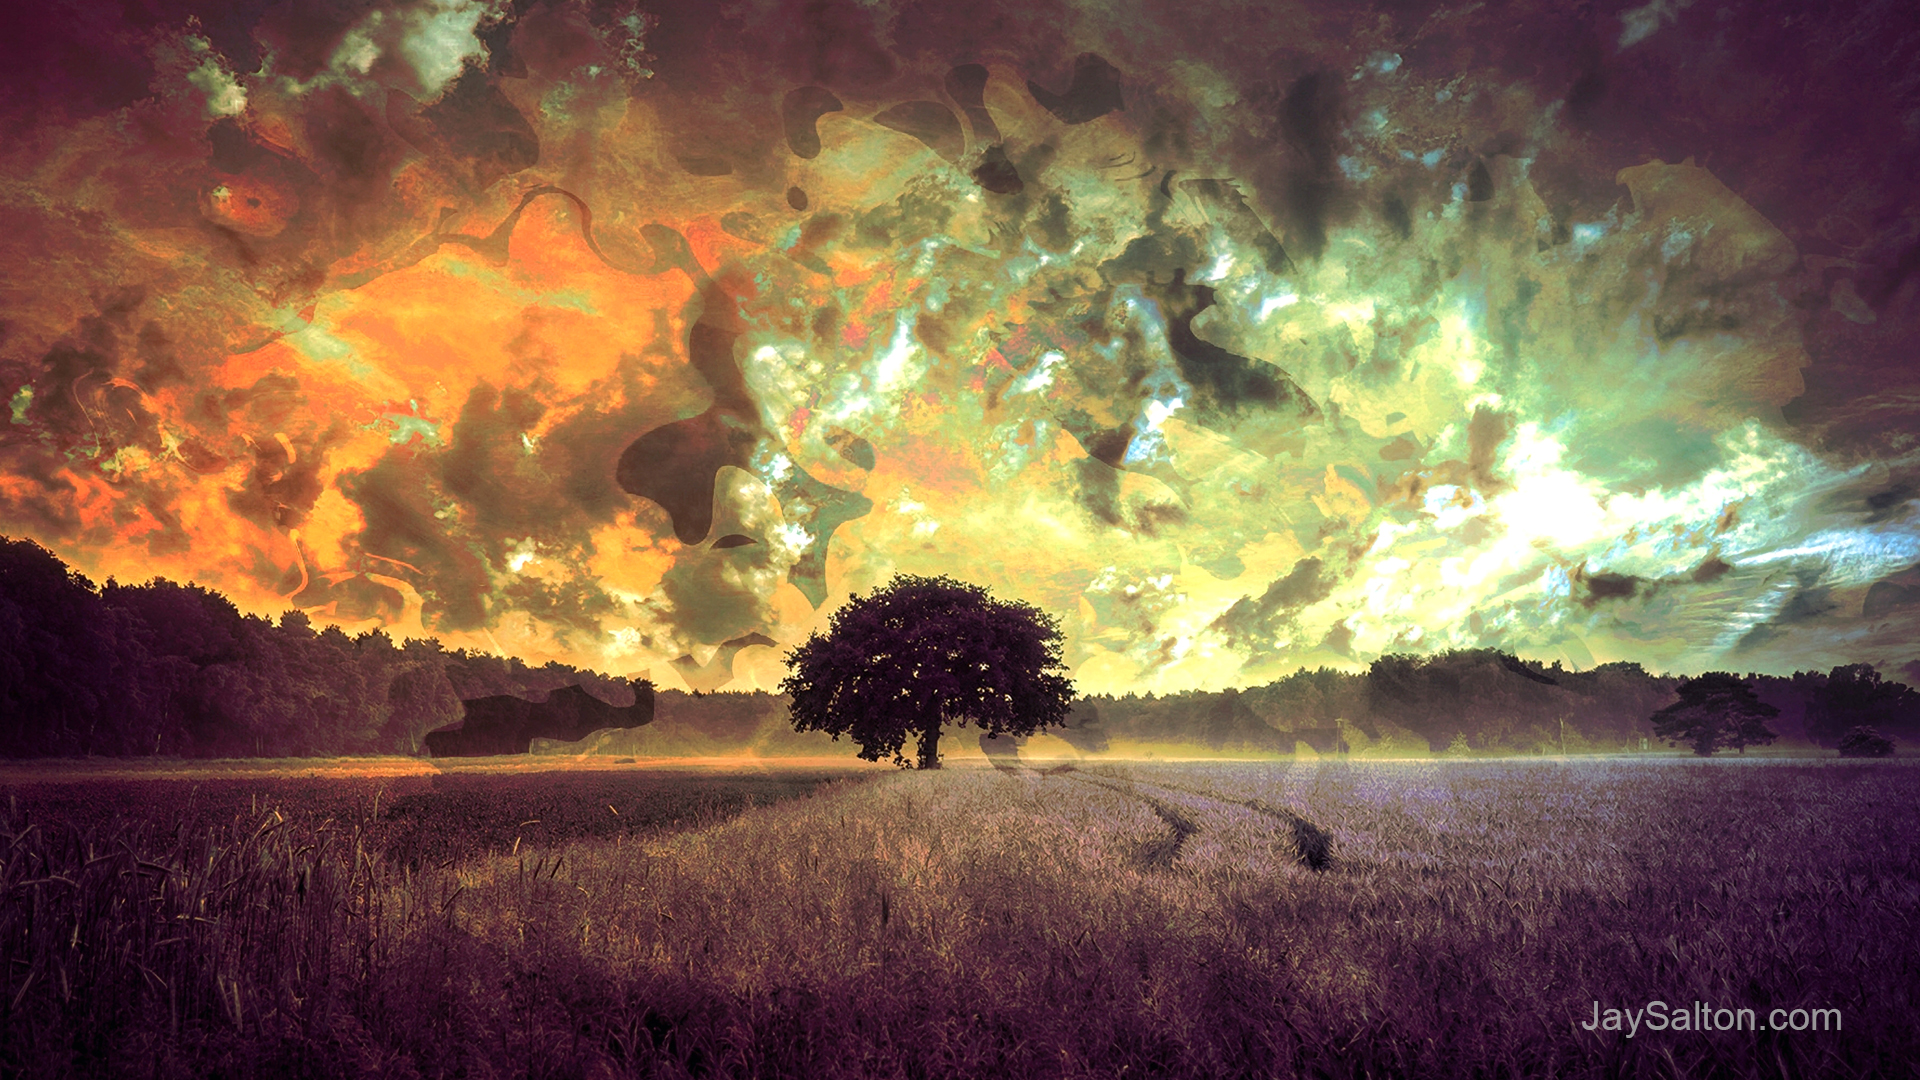 General 1920x1080 digital art 3D Abstract nature Harvest landscape surreal fantasy art sunset sunrise sky clouds dry grass field plants trippy psychedelic psychedelic rock LSD rave Agro (Plants)